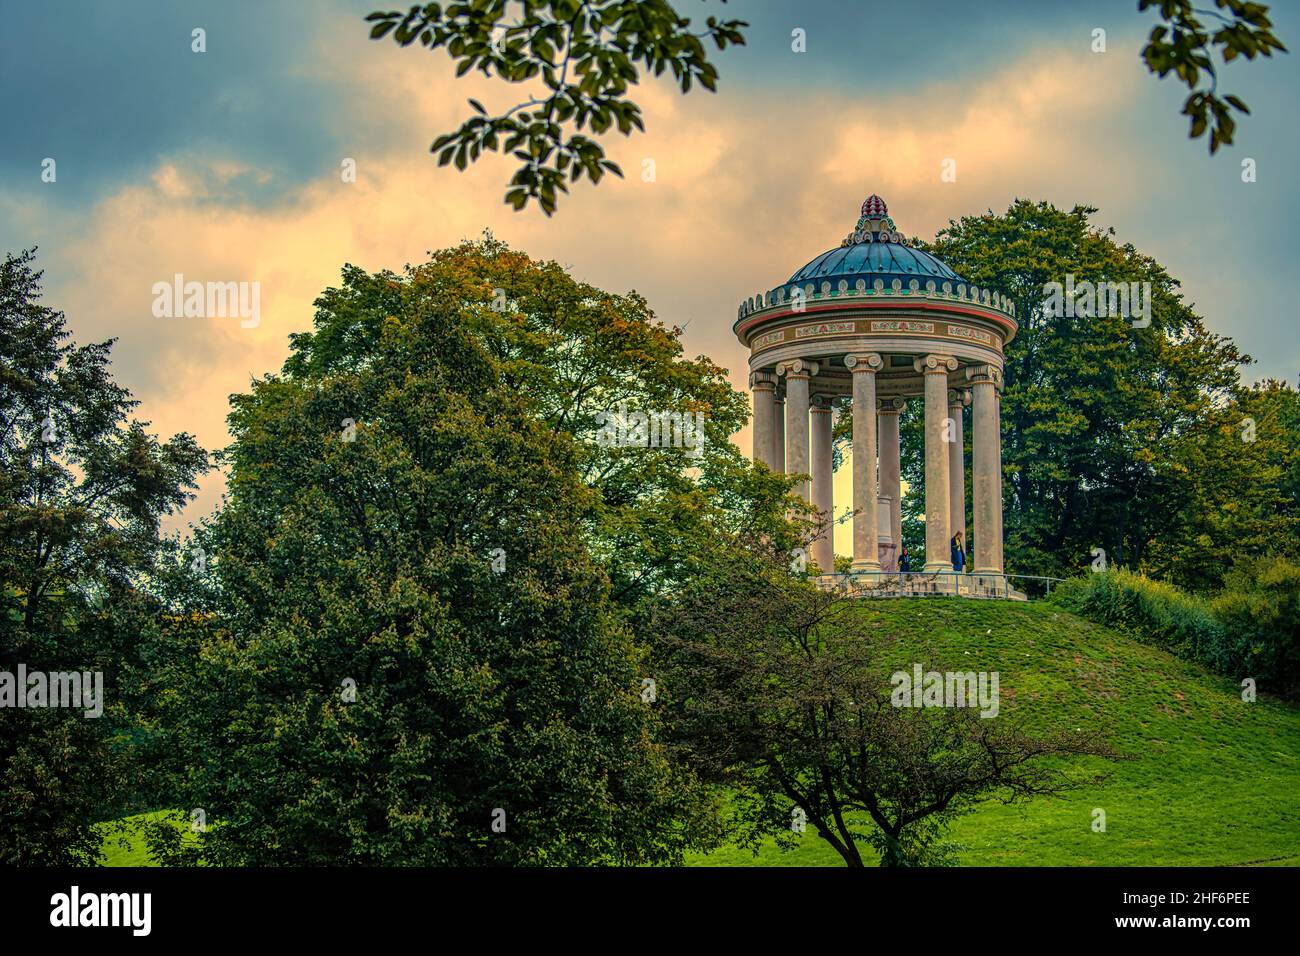 English Garden of Munich - The beautiful temple architecture of the Monopteros at the fall season with sunset clouds Stock Photo